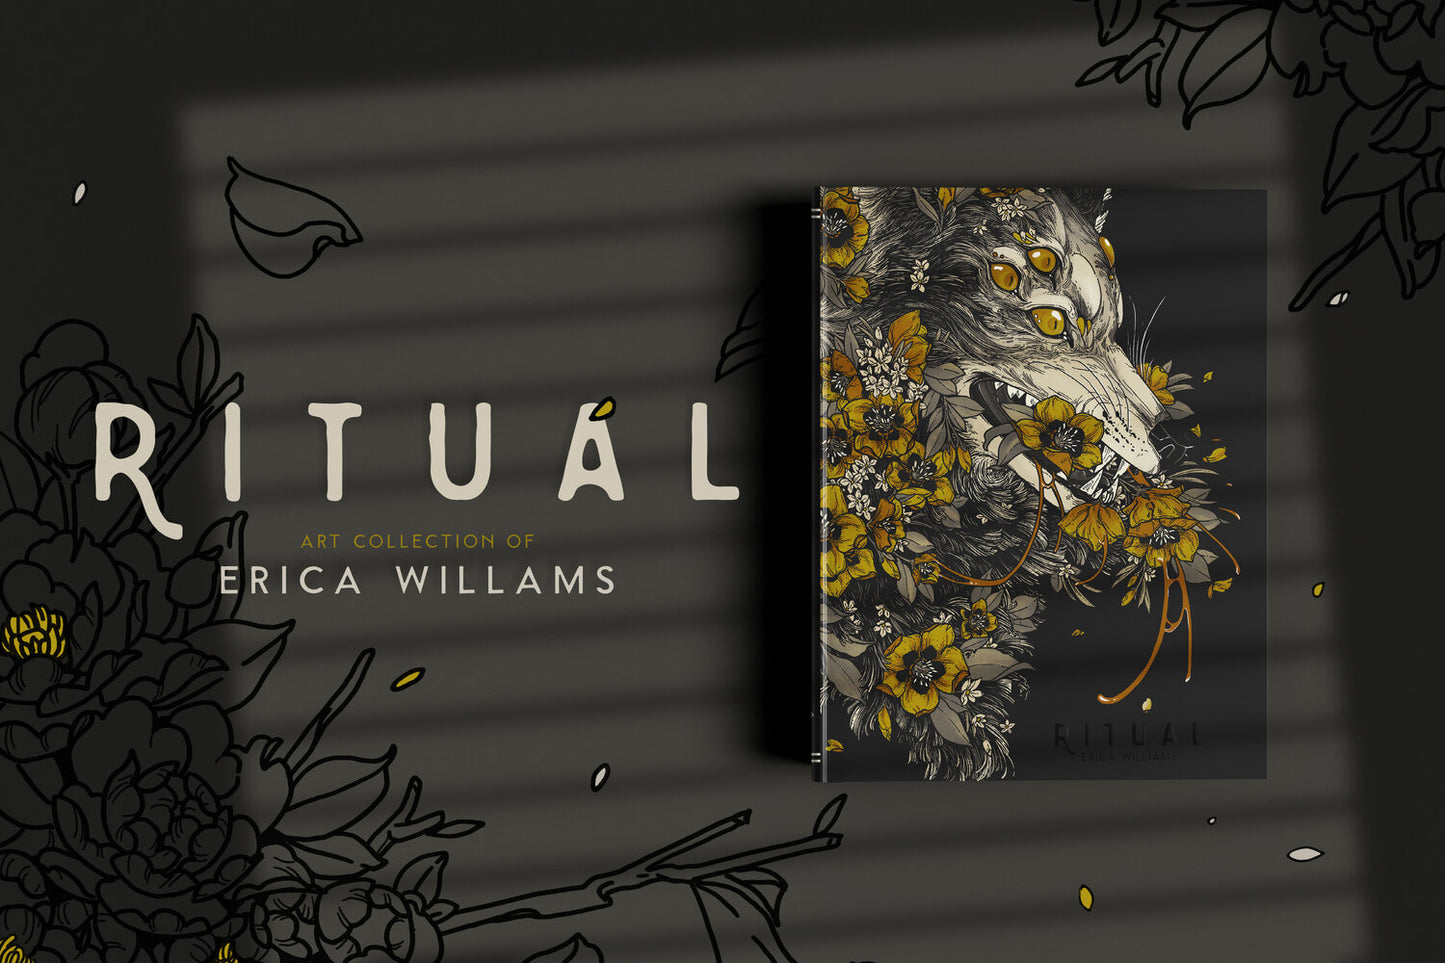 A graphic showing a closed copy of ritual. The text "ritual art collection of Erica Williams" is next to it. There are hand drawn flowers on the backiground. The lighting is as if sun is coming through the window blinds.